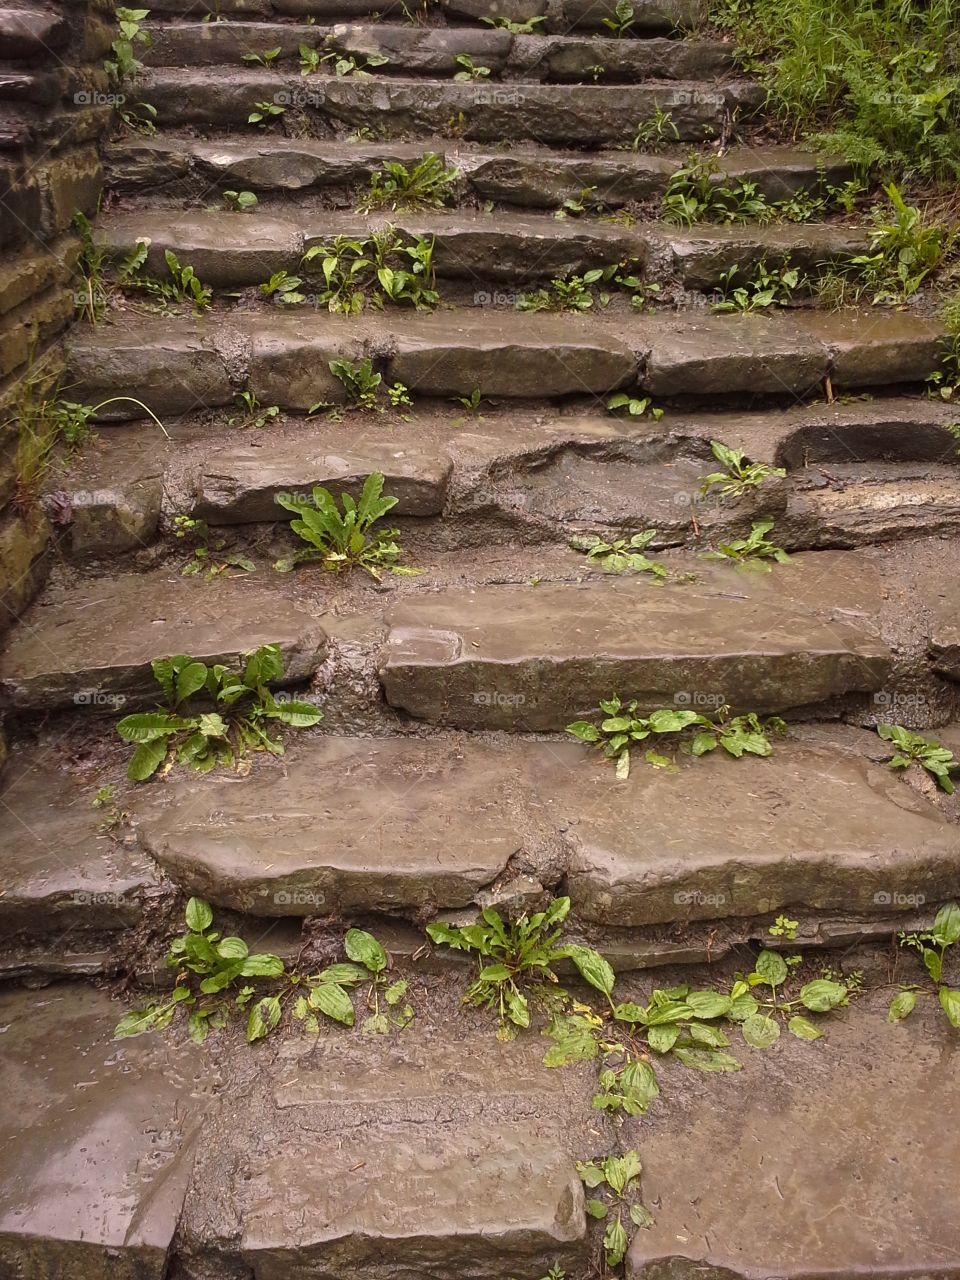 Plant Growth on Steps